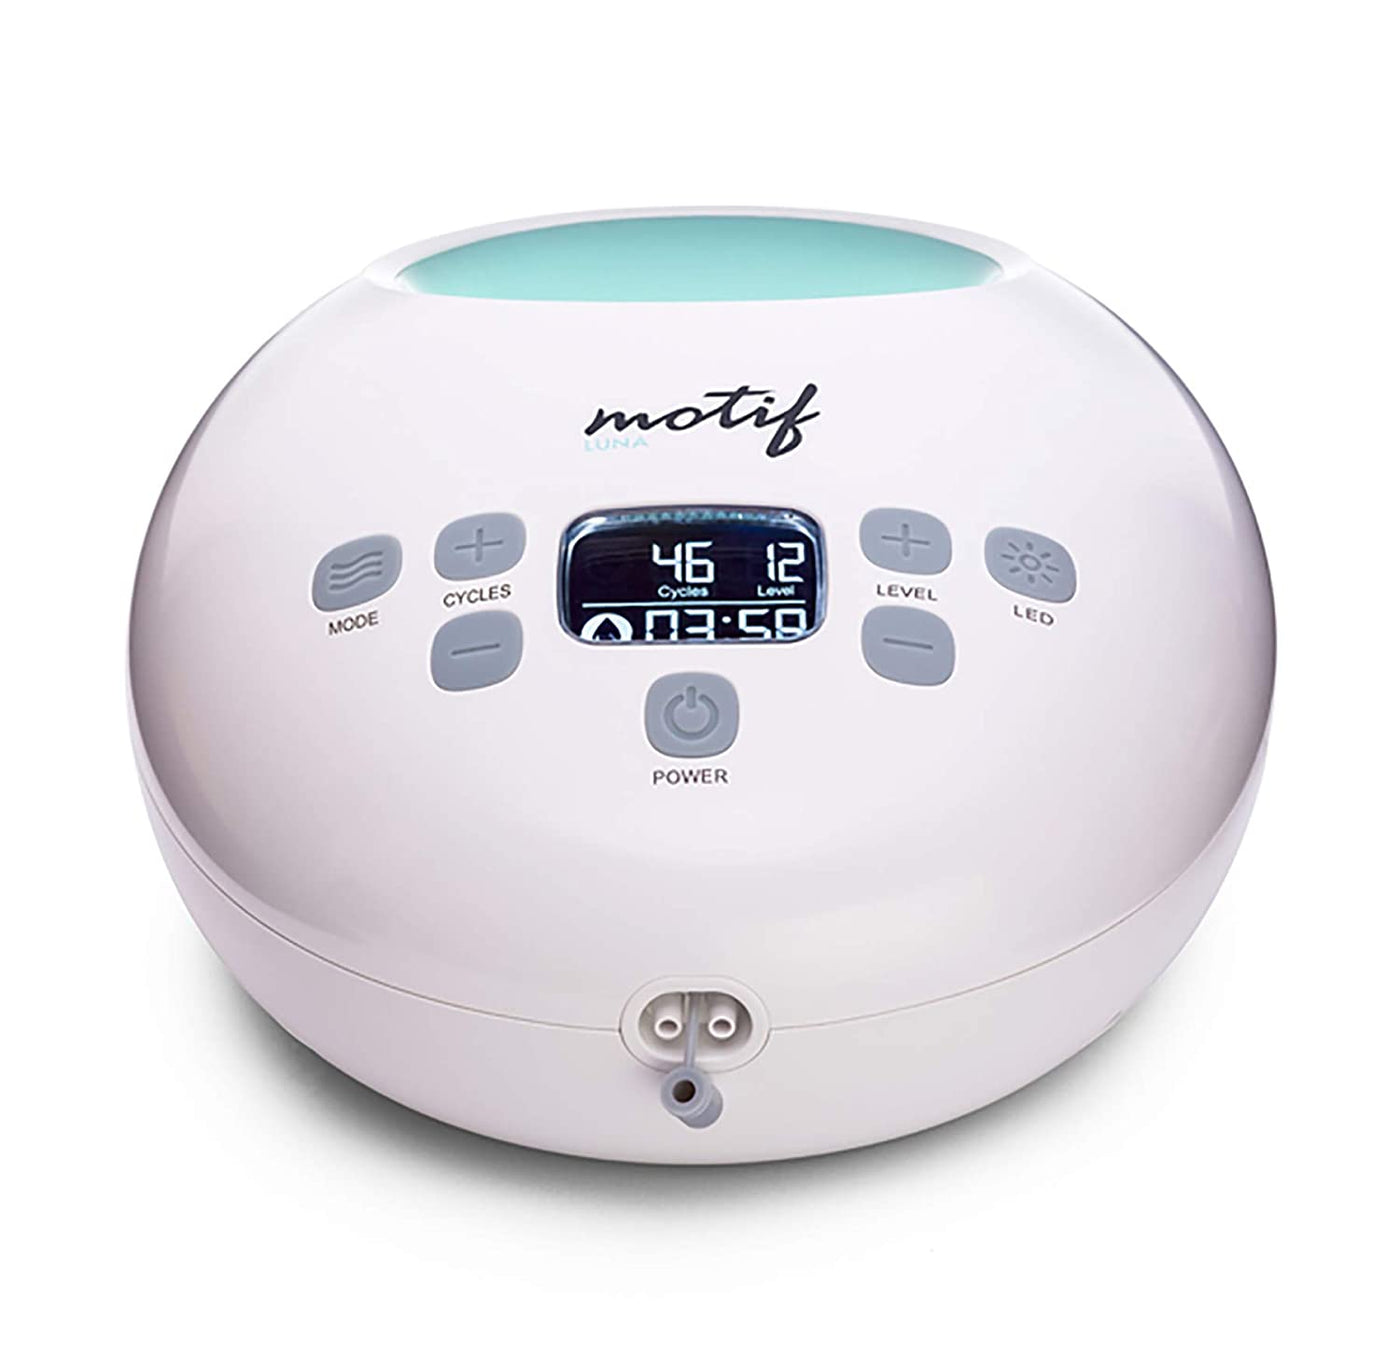 The NEW Luna Battery Operated Breast Pump from Motif Review